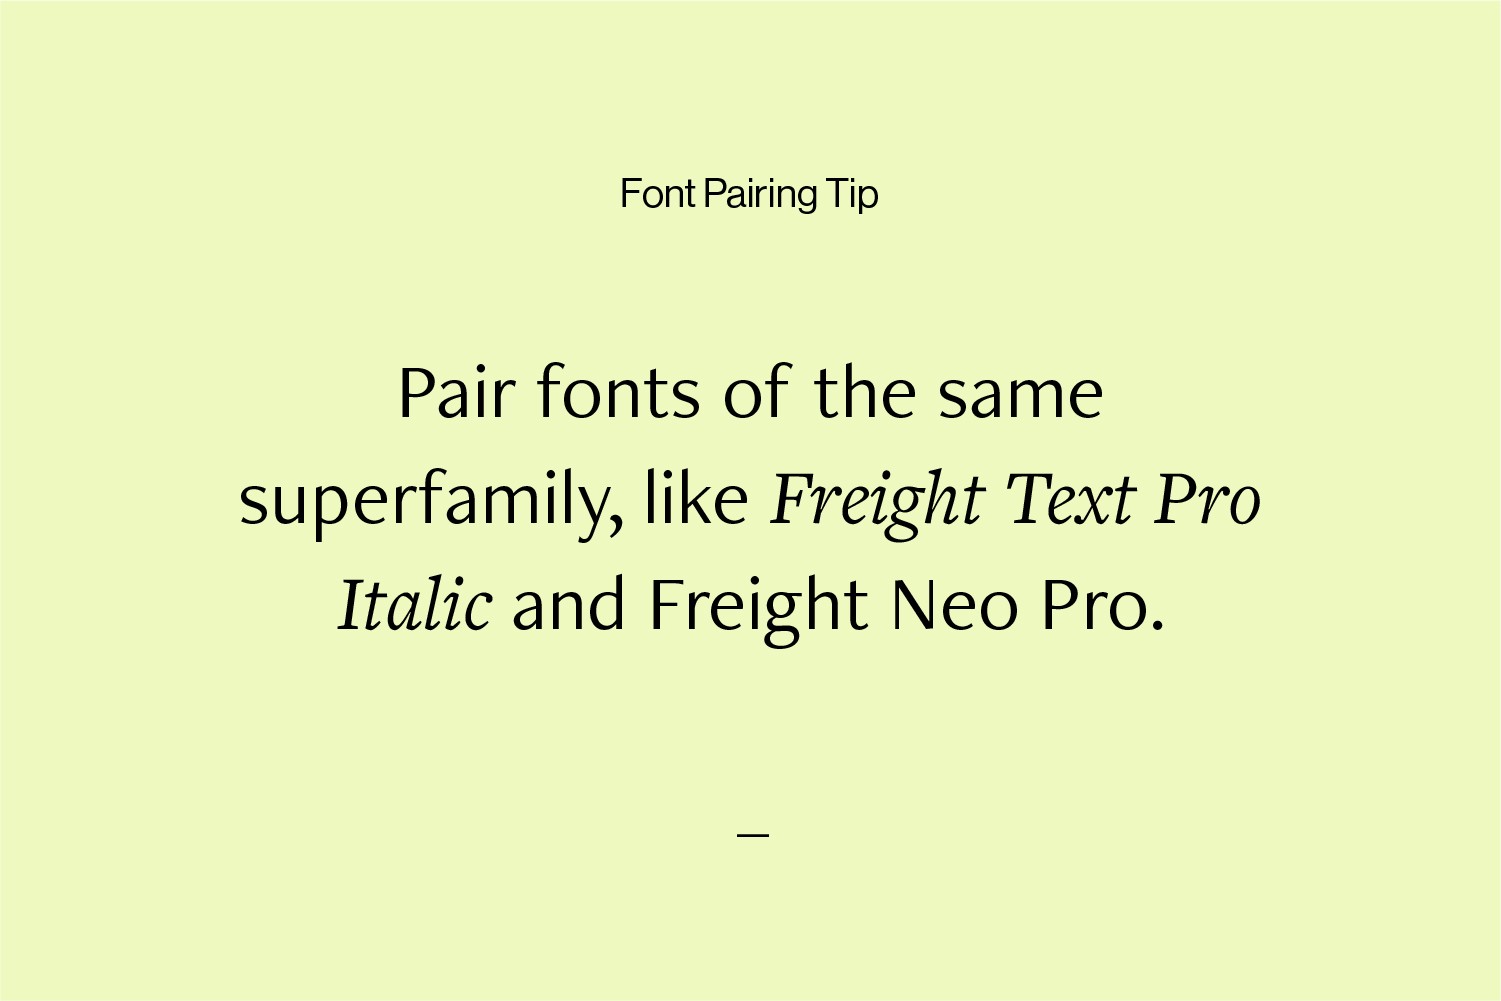 Font pairing advice that reads: Pair fonts of the same superfamily, like Freight Text Pro Italic and Freight Neo Pro.